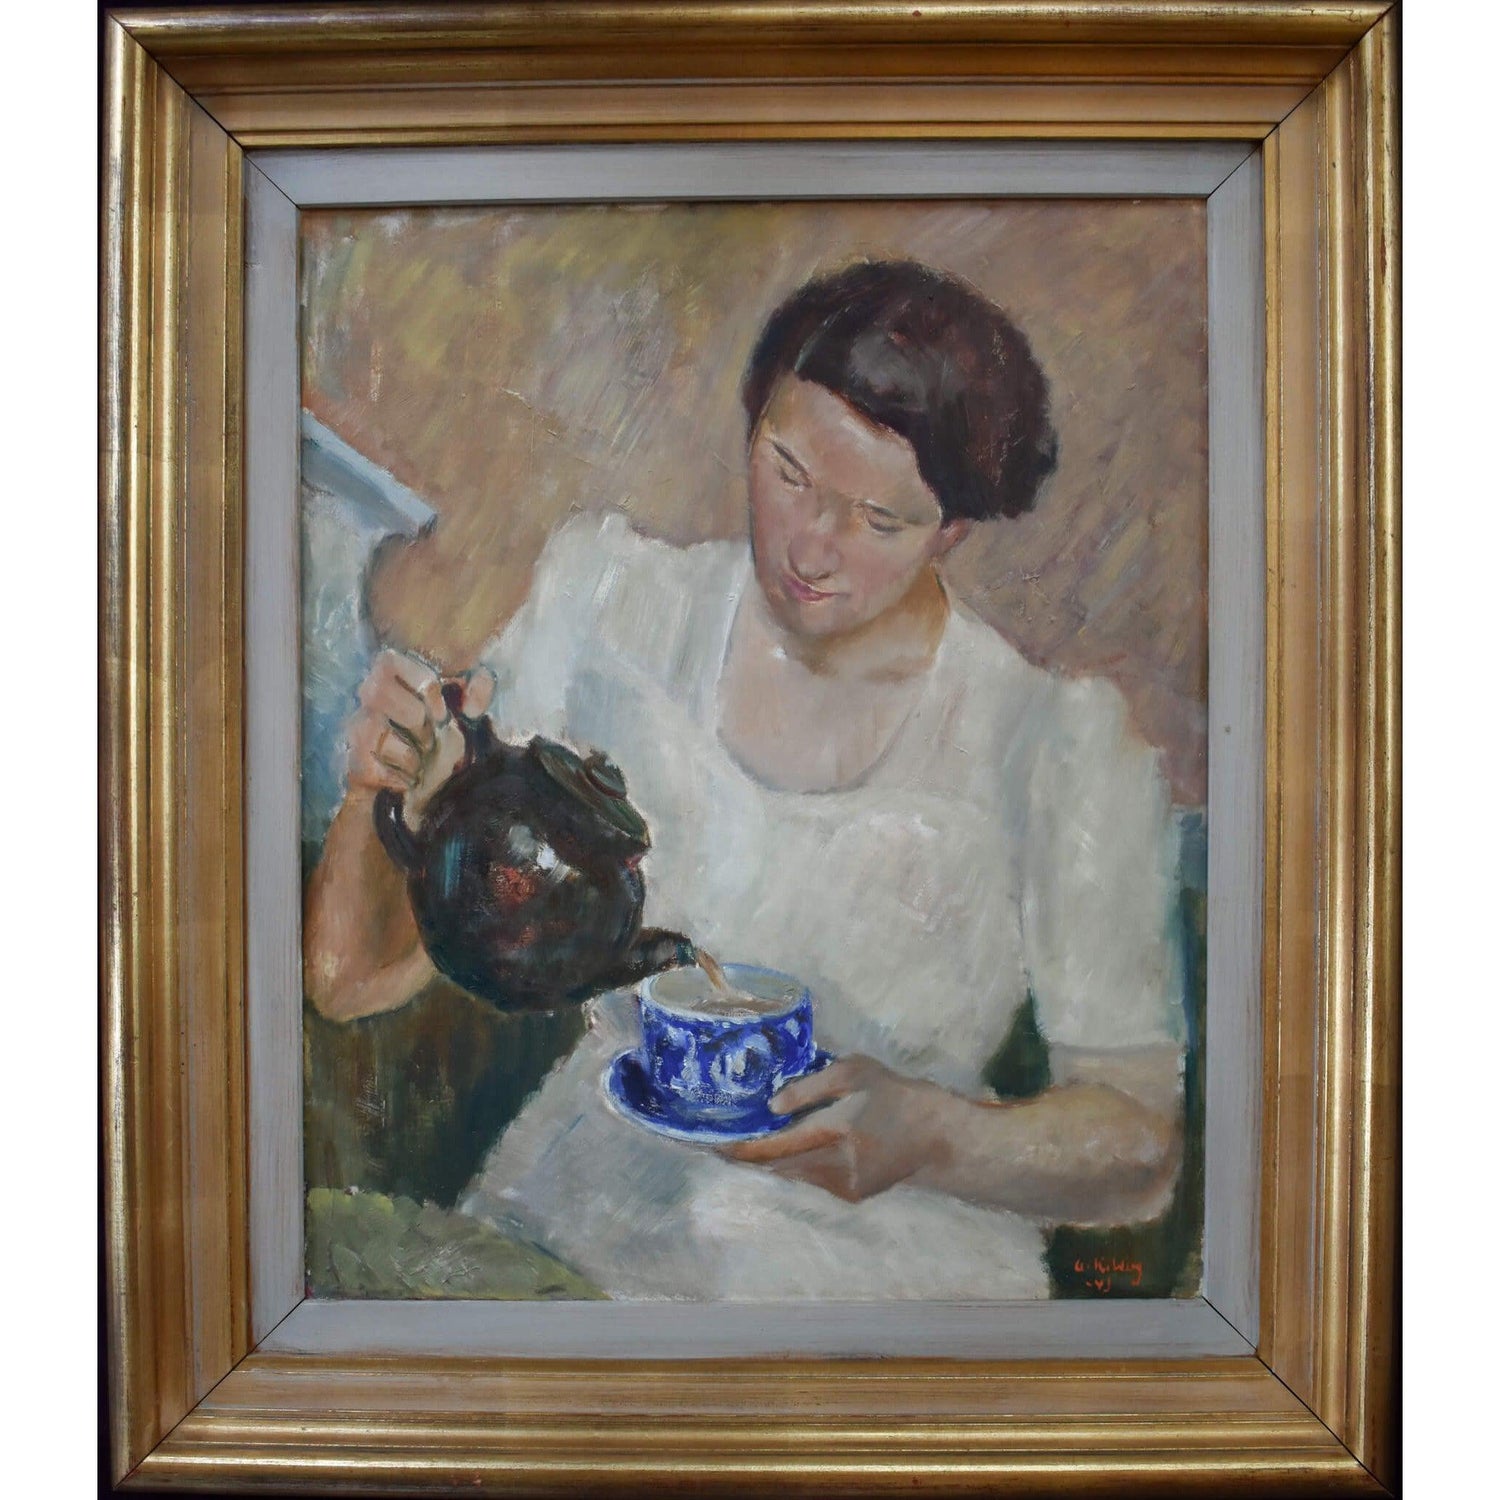 Vintage scene painting by Arne Kilsby depicting a woman gracefully pouring a cup of tea. For sale at Winckelmann Gallery